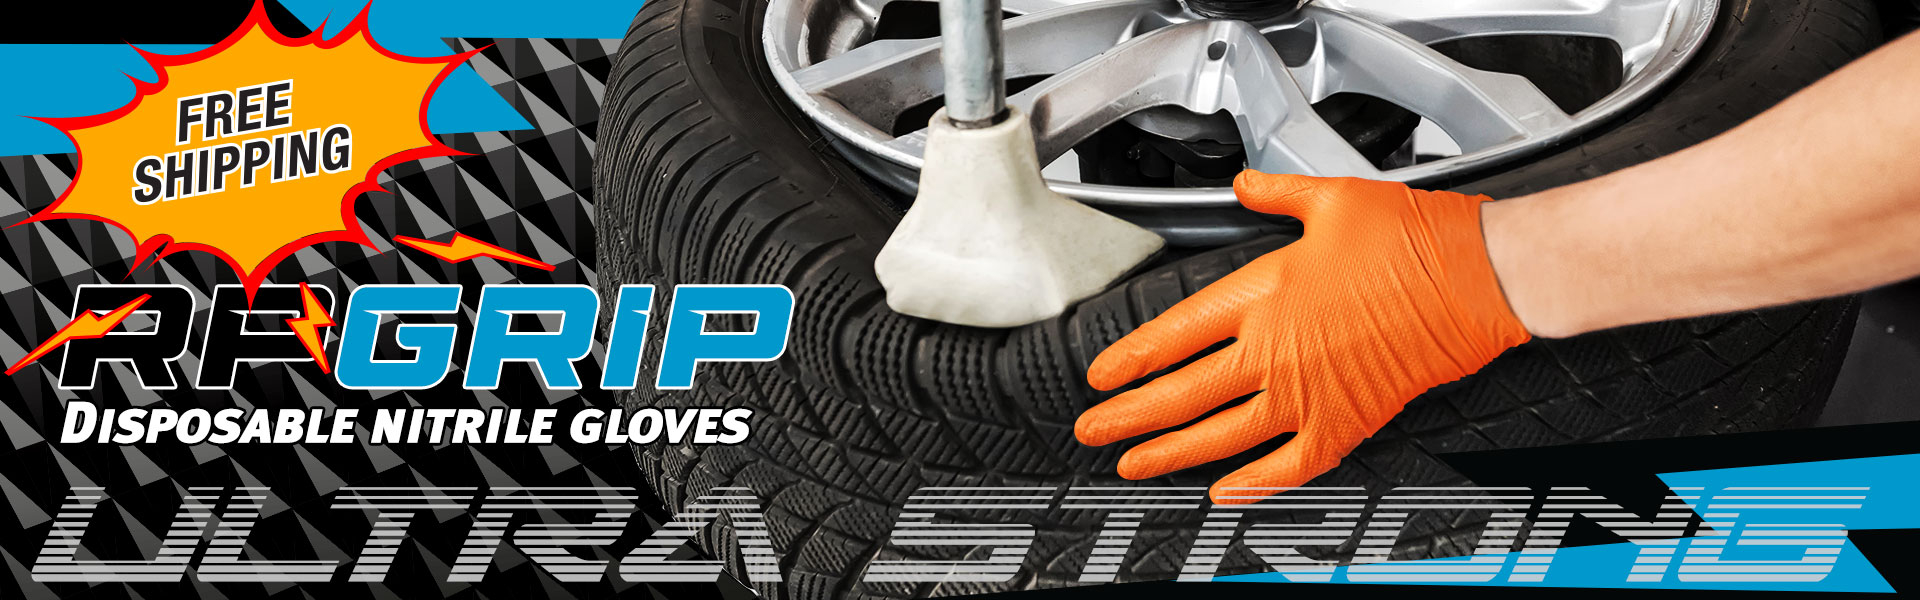 Car Shop Tools and Equipment Philippines